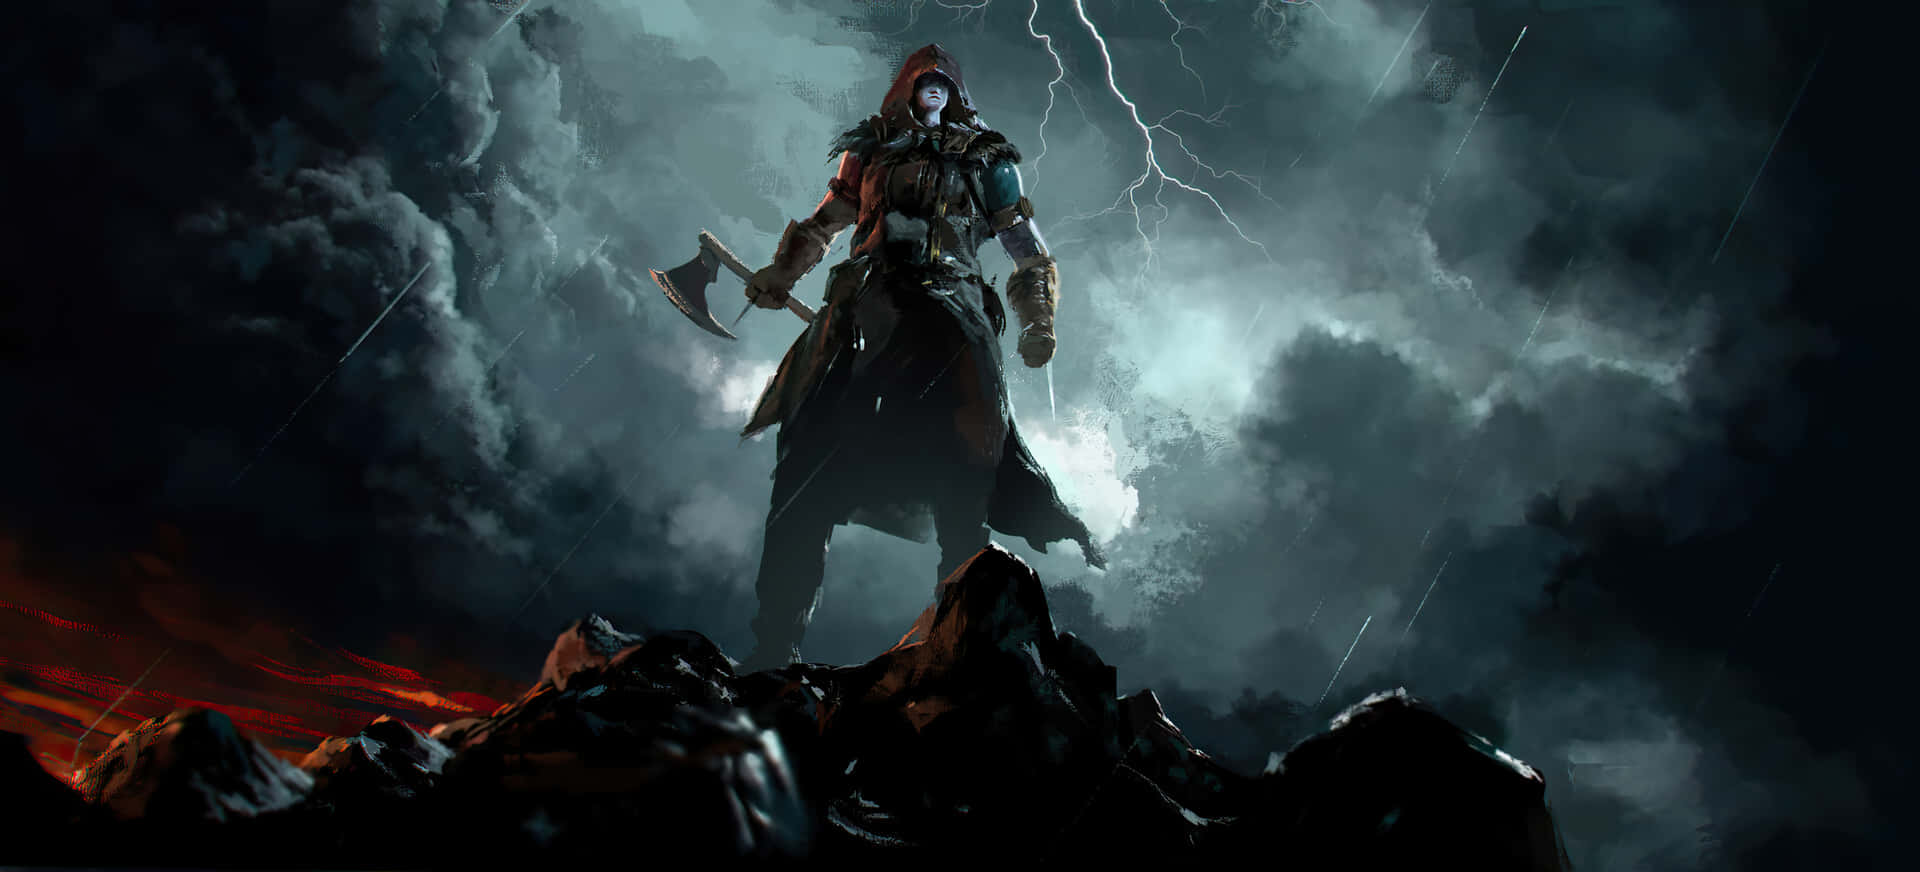 A Man Standing On A Mountain With Lightning